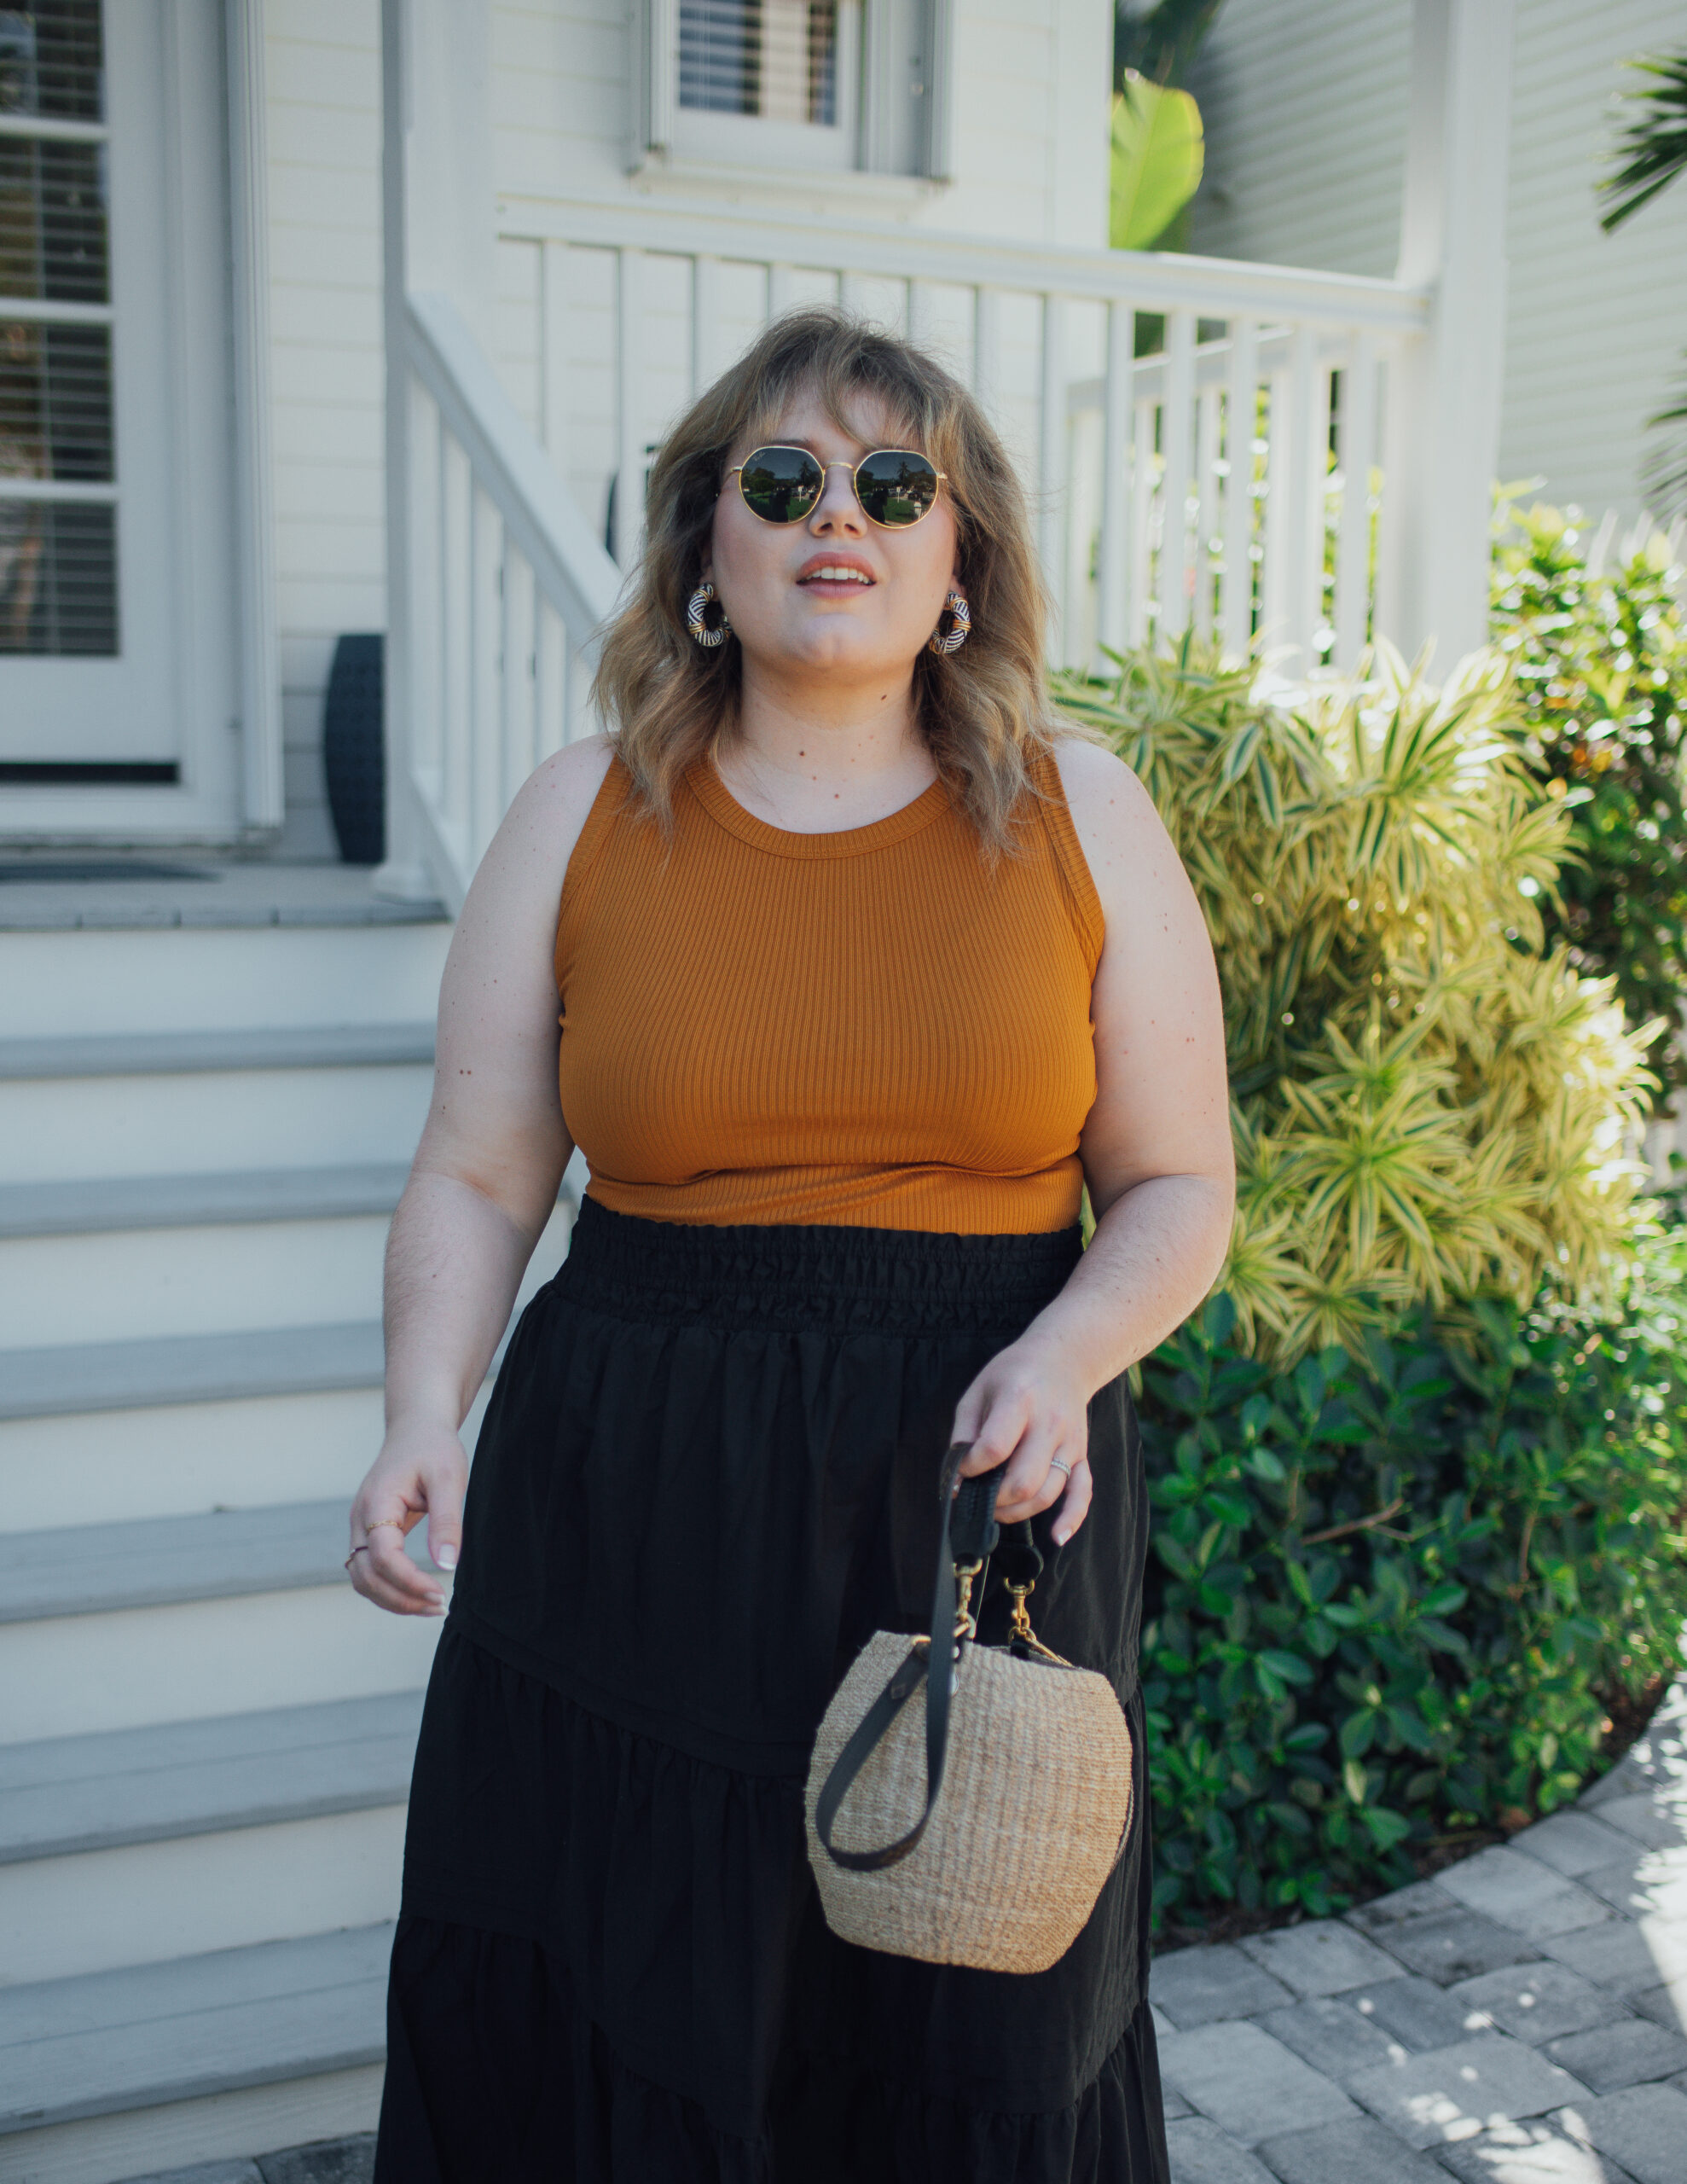 Sharing a roundup of skirts for spring dressing. Warm weather will come, and we will be ready with plus size skirts and tops! 